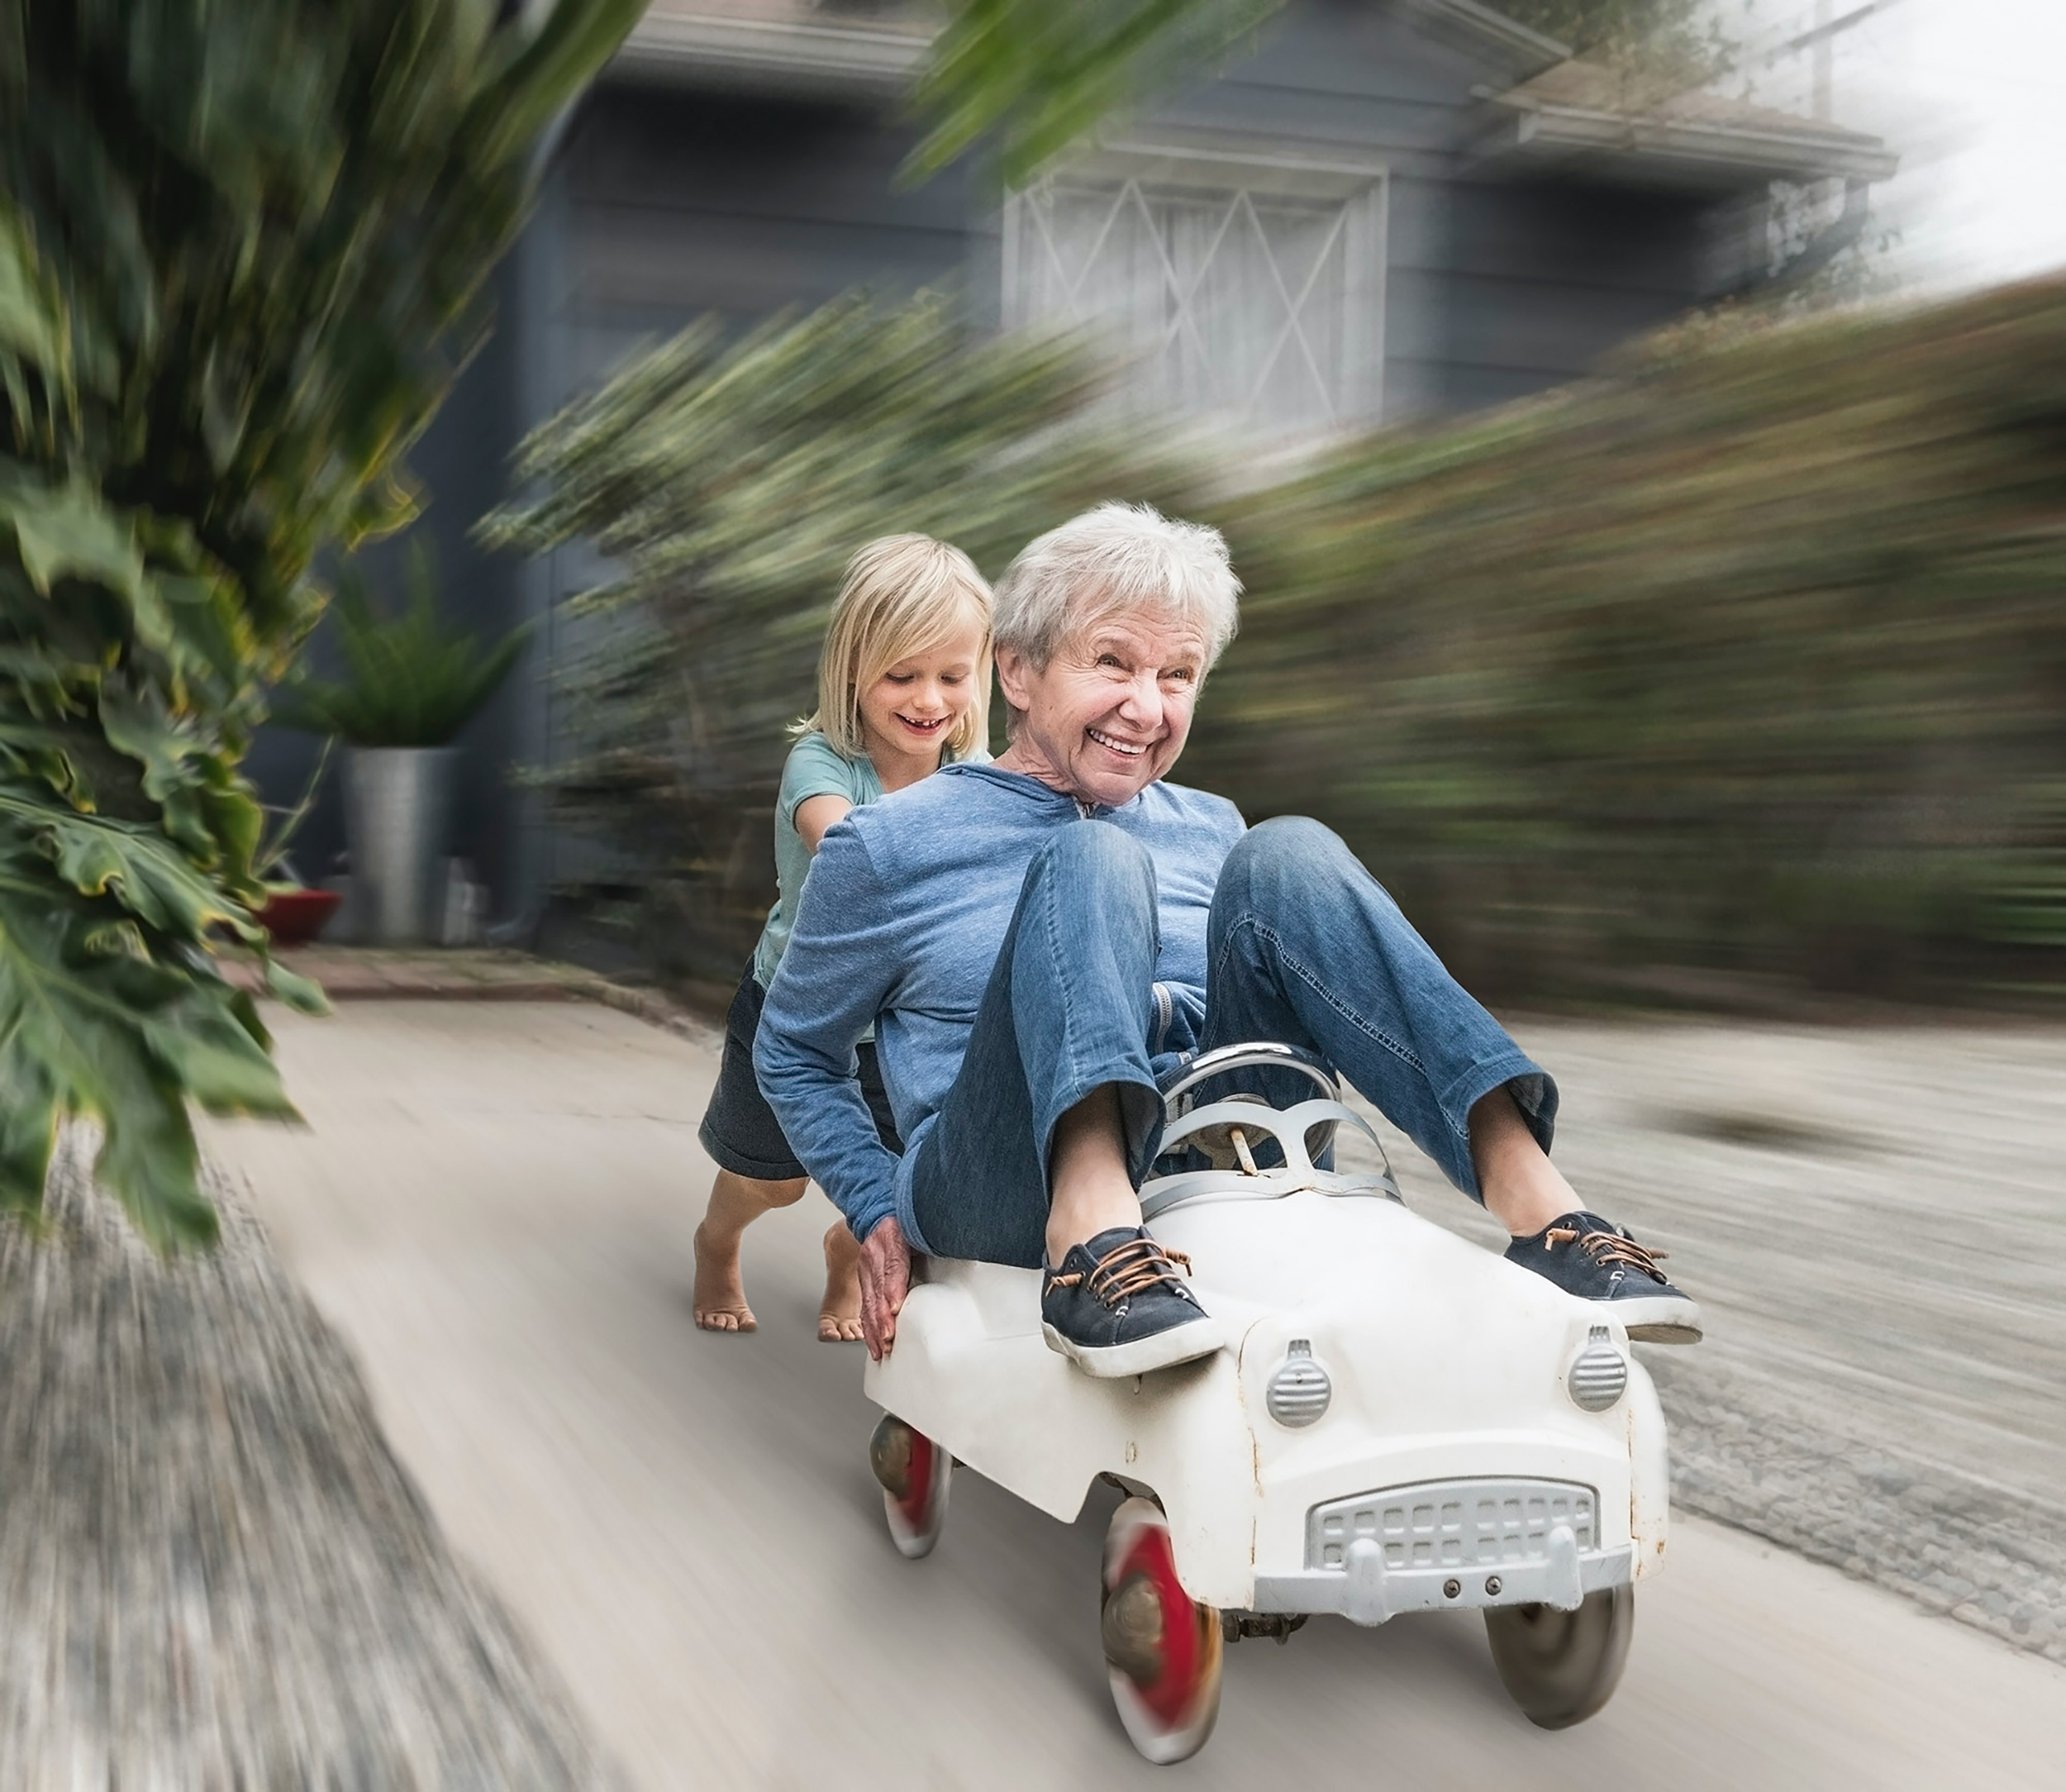 A grandchild pushing her grandmother down the driveway in a toy car